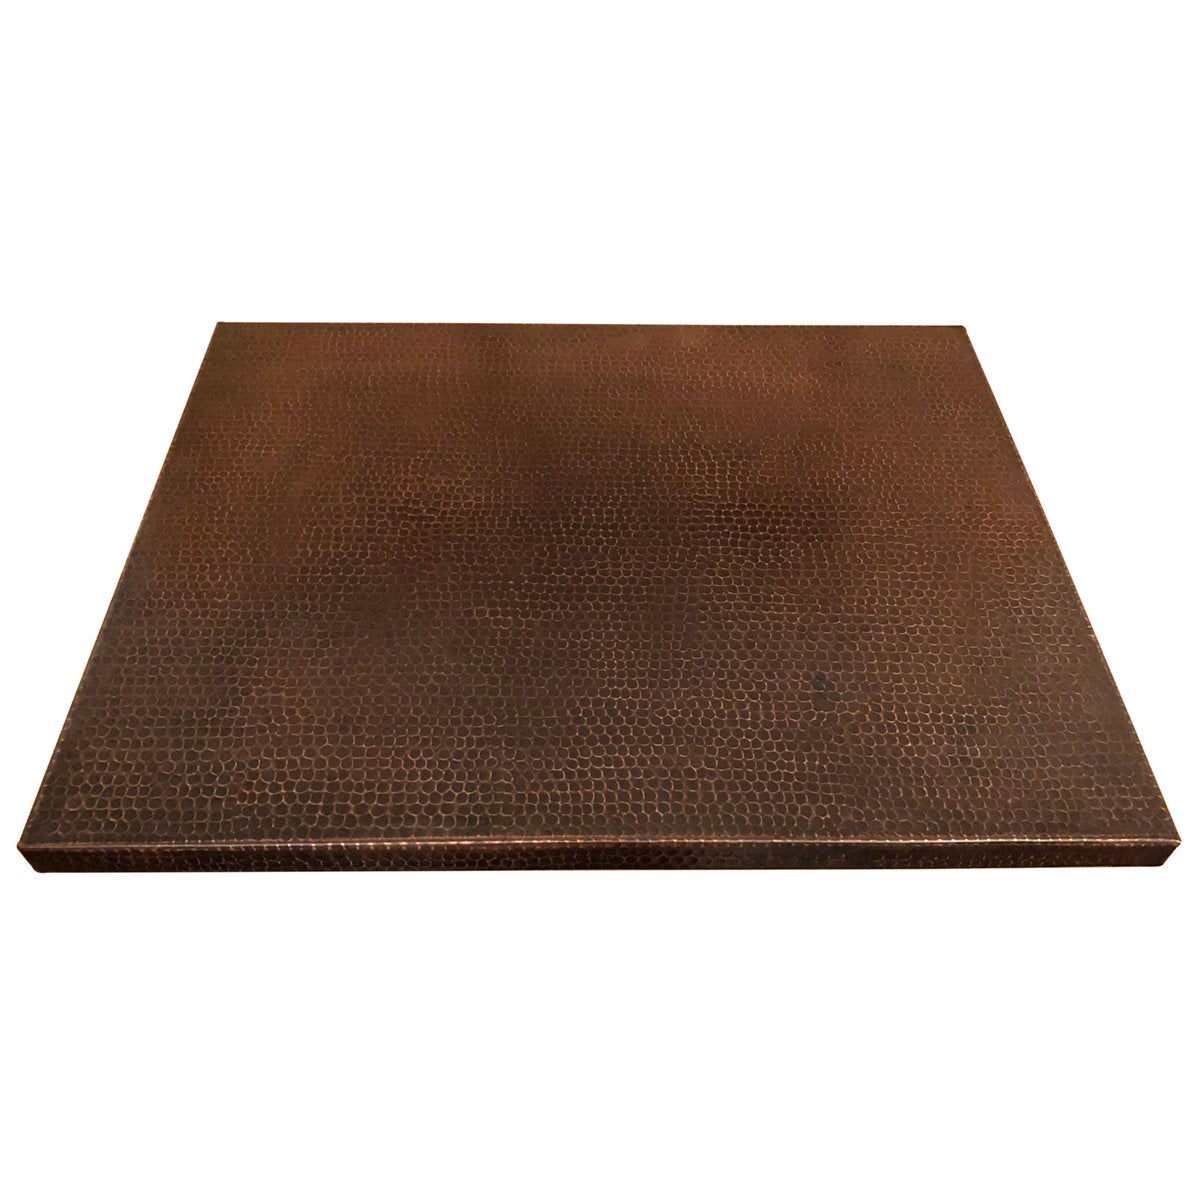 Premier Copper Products 30" x 24" Rectangle Hammered Copper Table Top